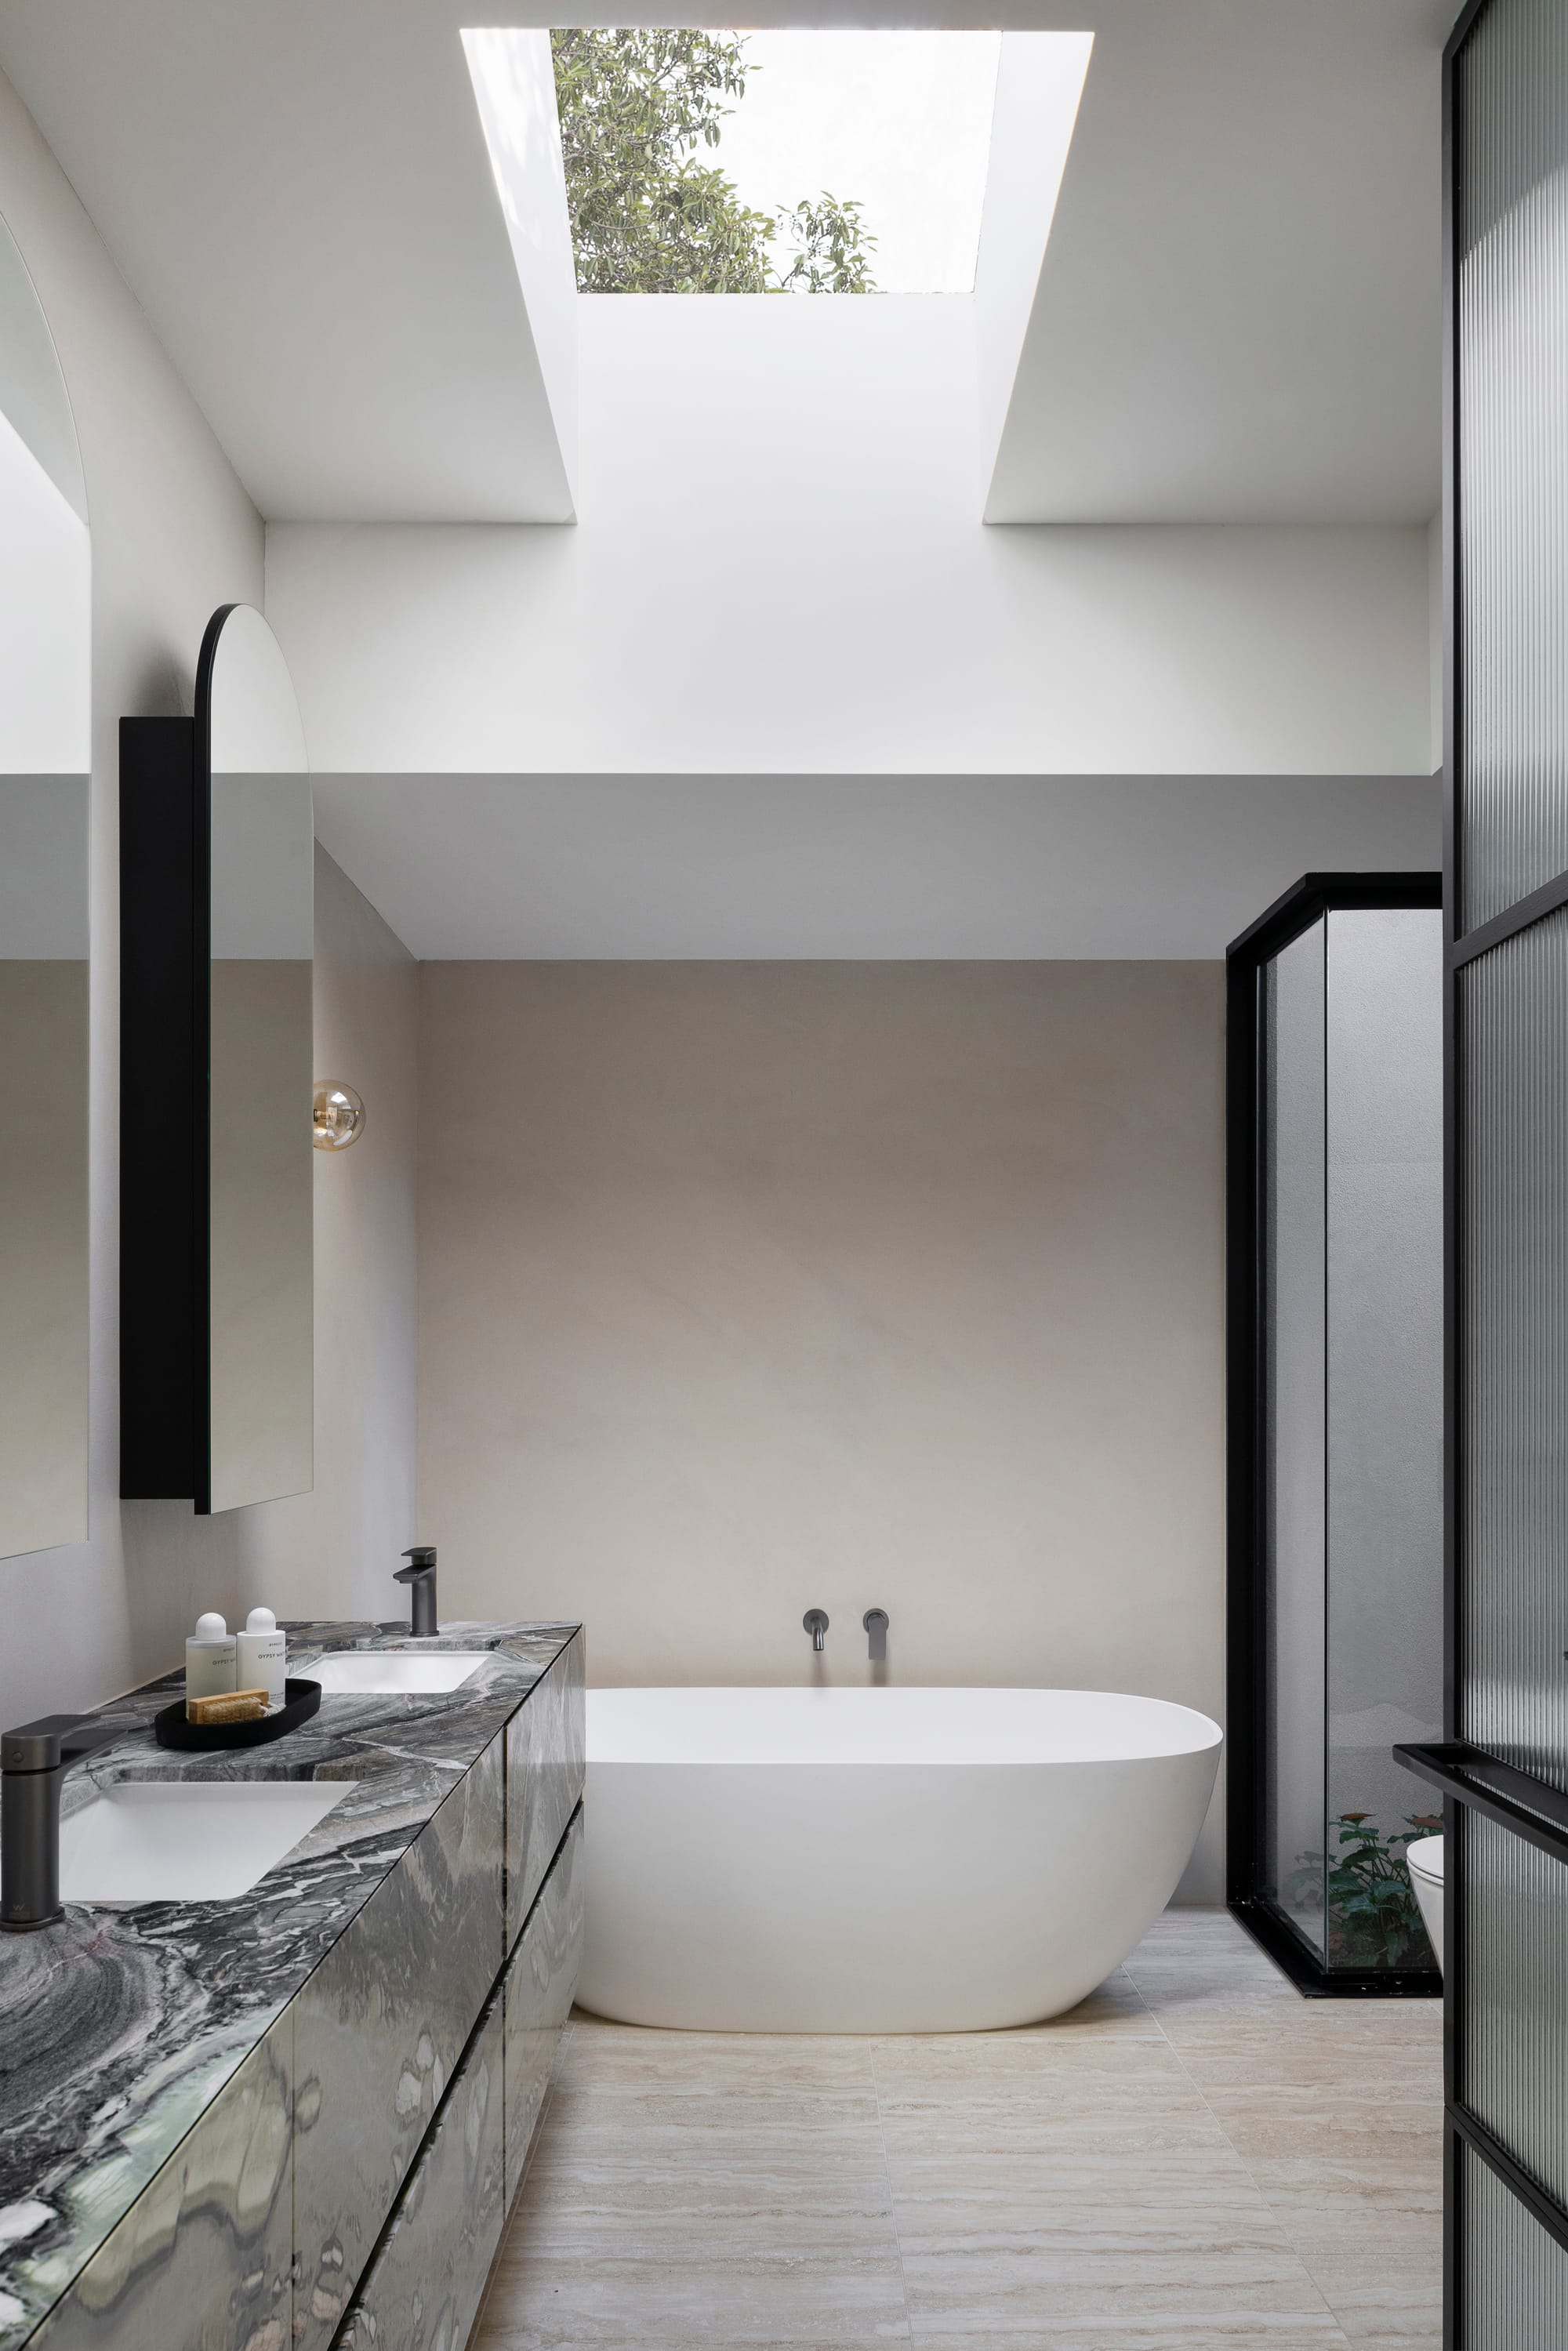 Goldsmith Residence by C.Kairouz Architects. Photography by Spacecraft. Bathroom with beige stone floors, green and black marbled bench and skylight. White freestanding bath. Fluted glass. 